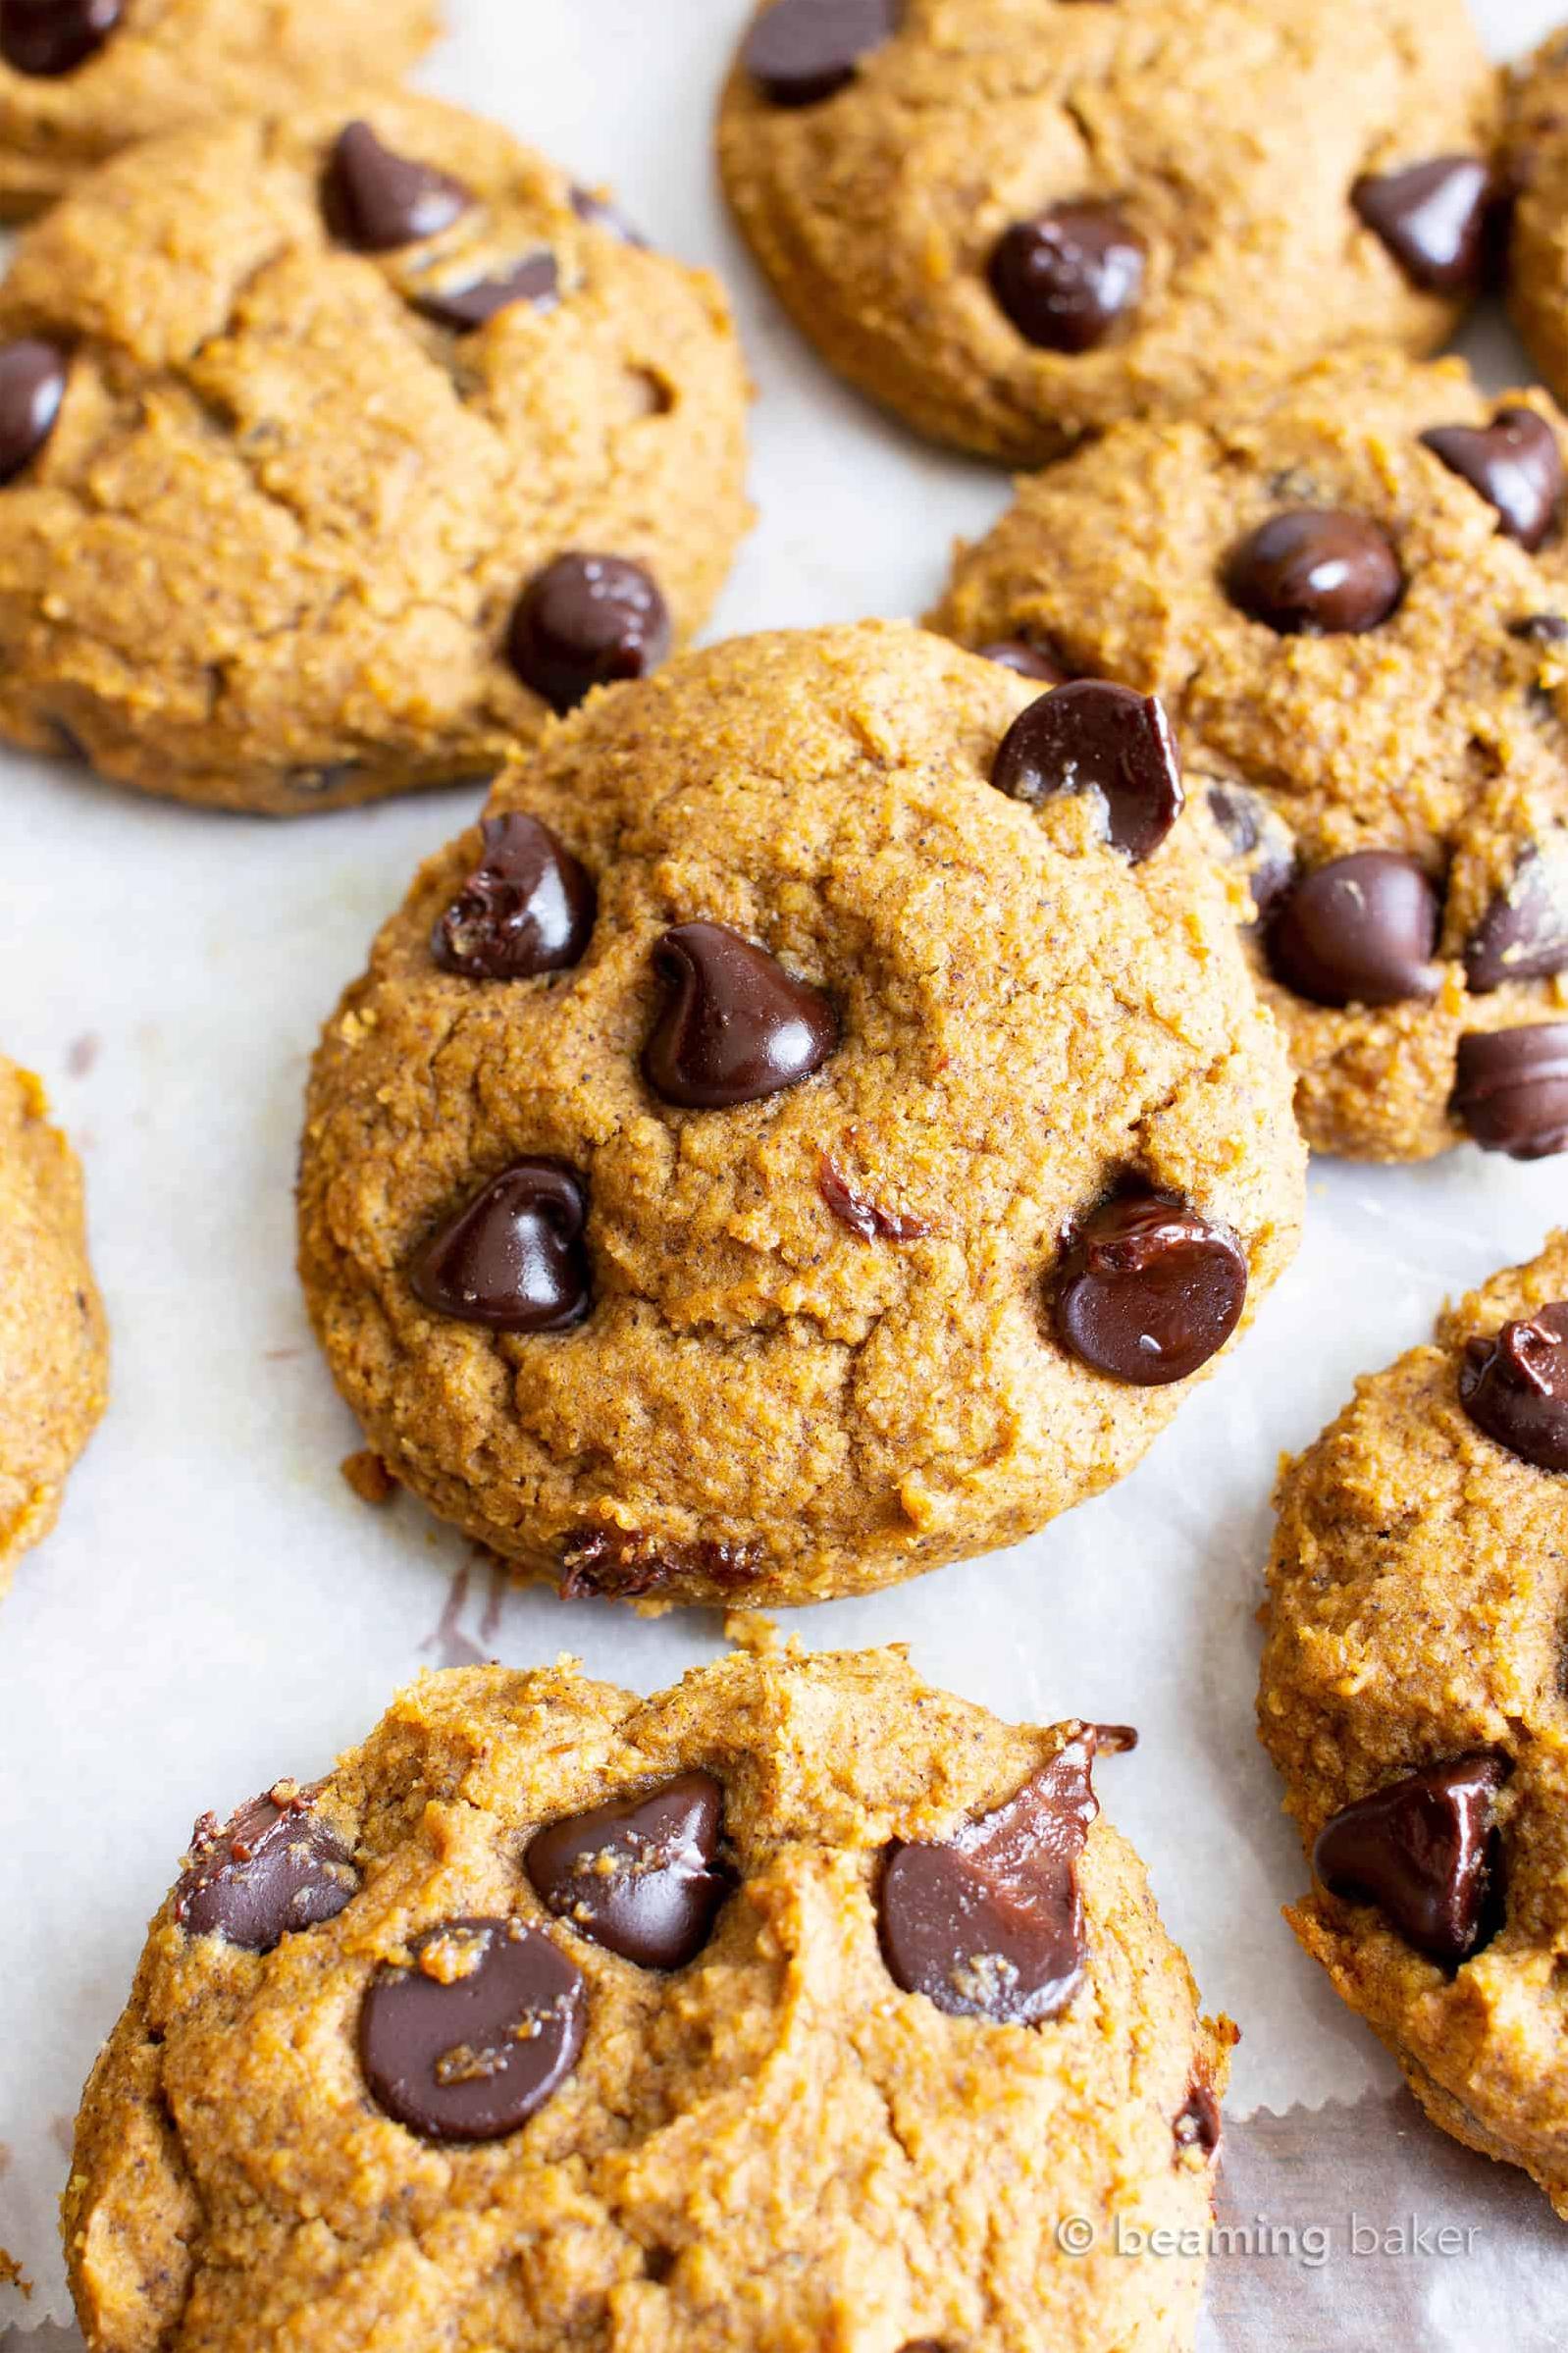  One bite of these vegan cookies and you'll be transported to fall.